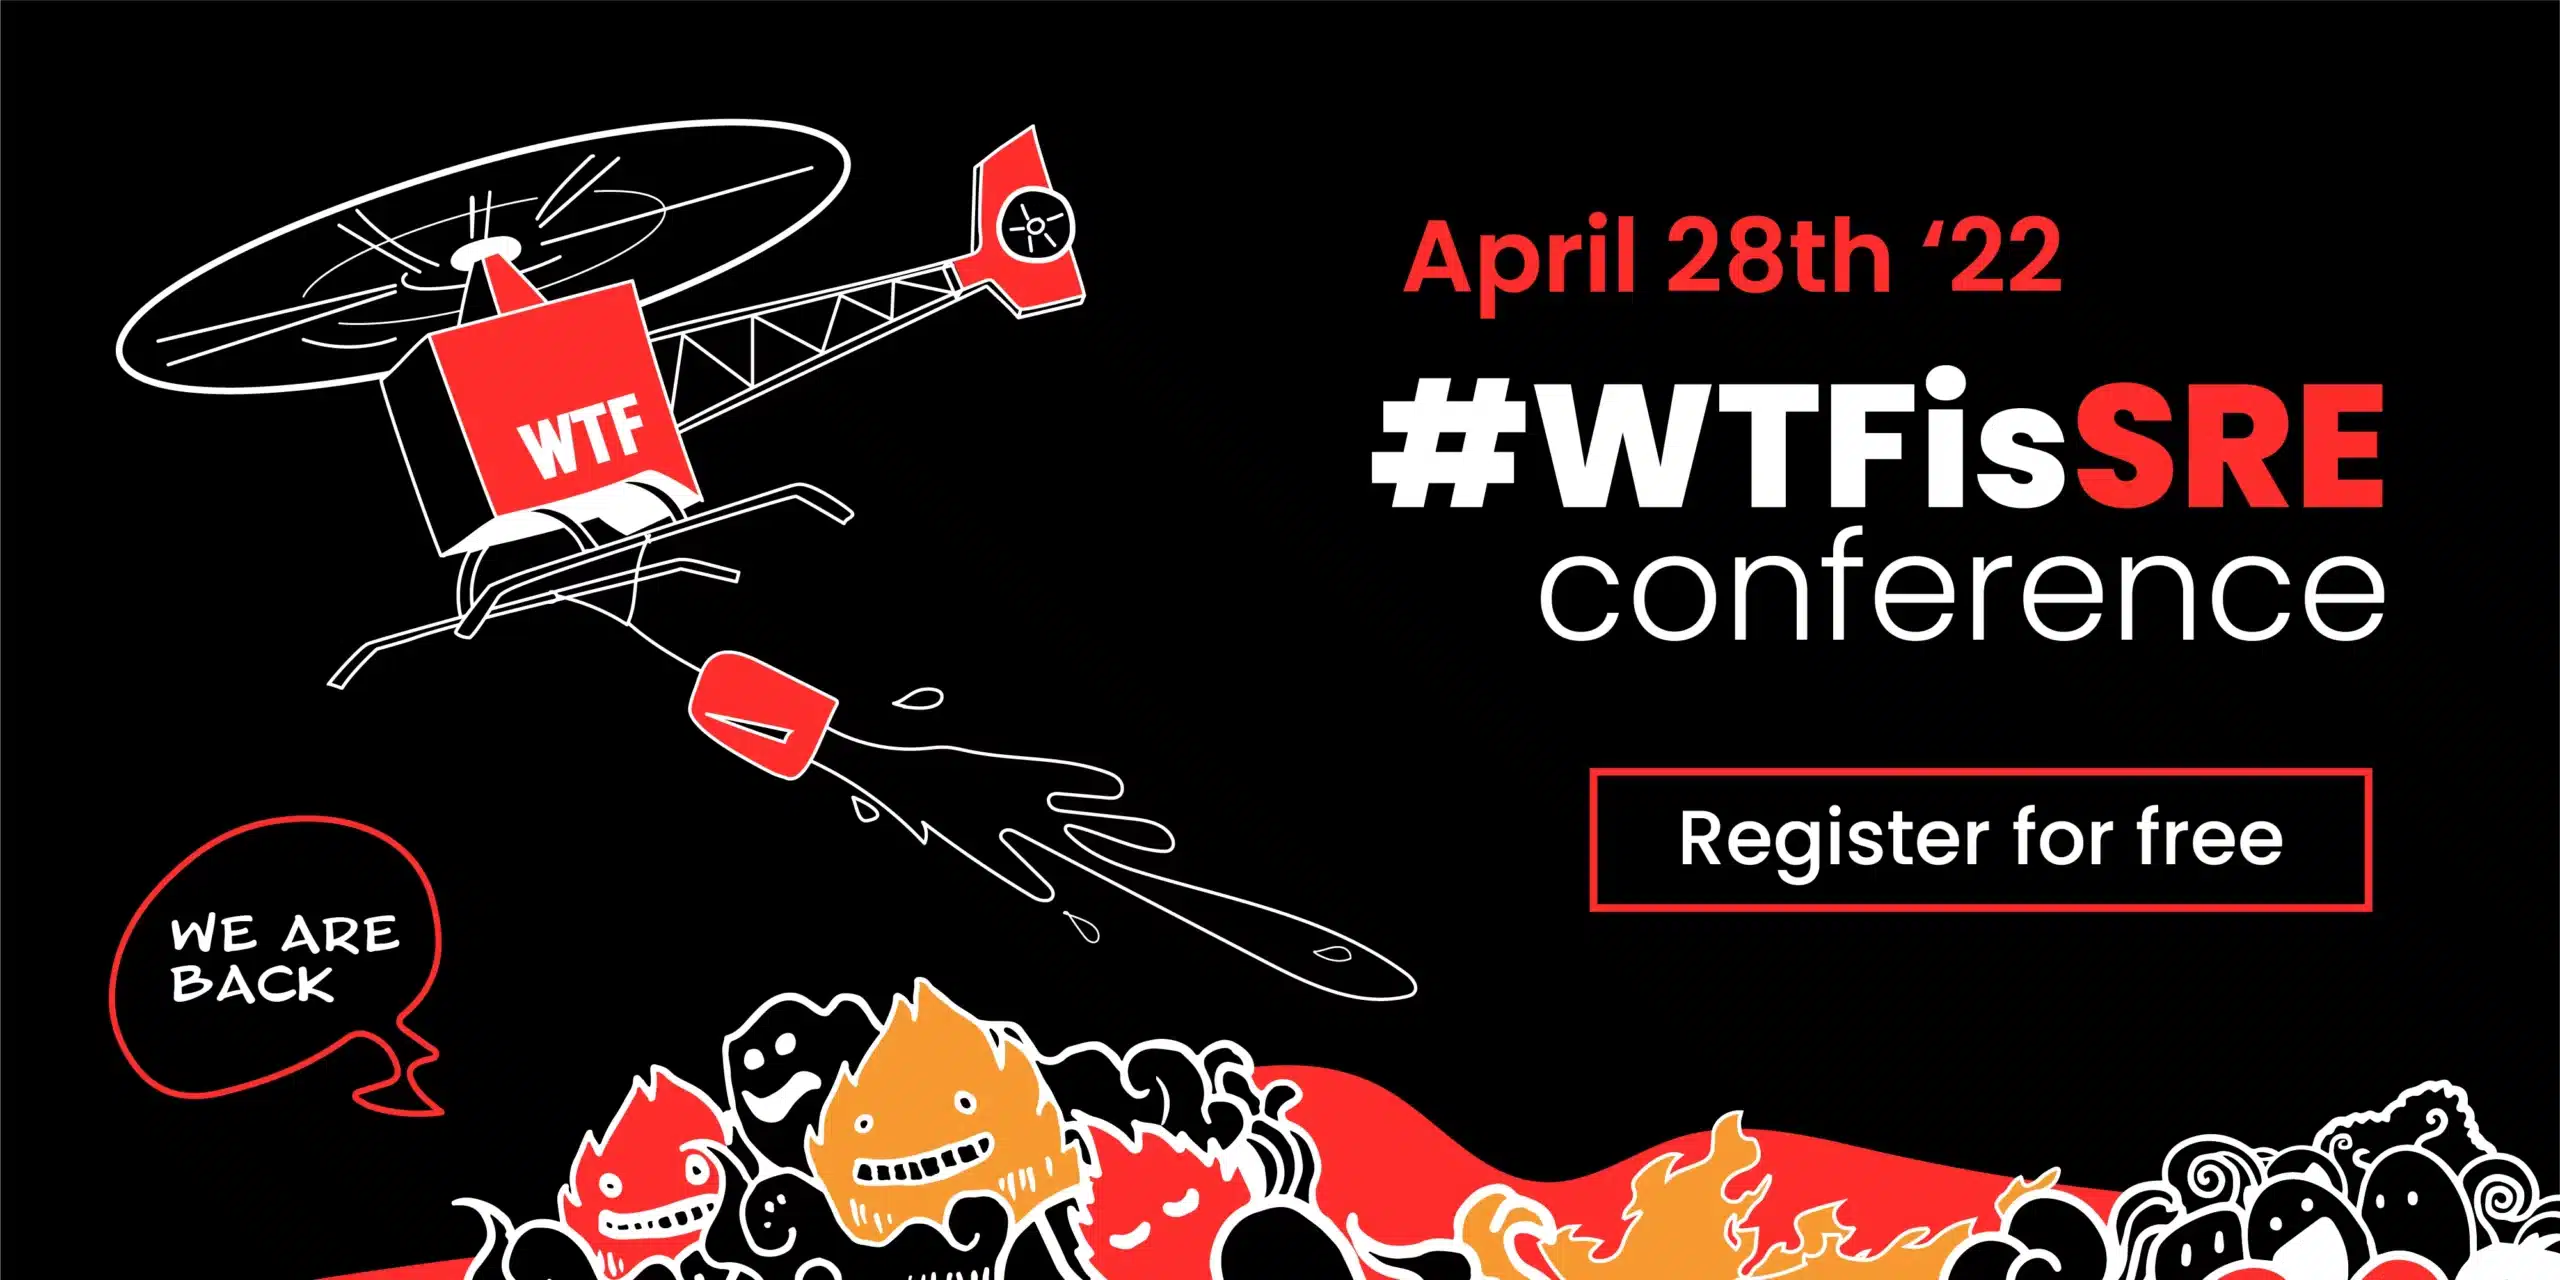 Join us at the WTF is SRE Conference on April 22nd, where industry experts will discuss the latest insights and trends in Site Reliability Engineering (SRE). Don't miss this